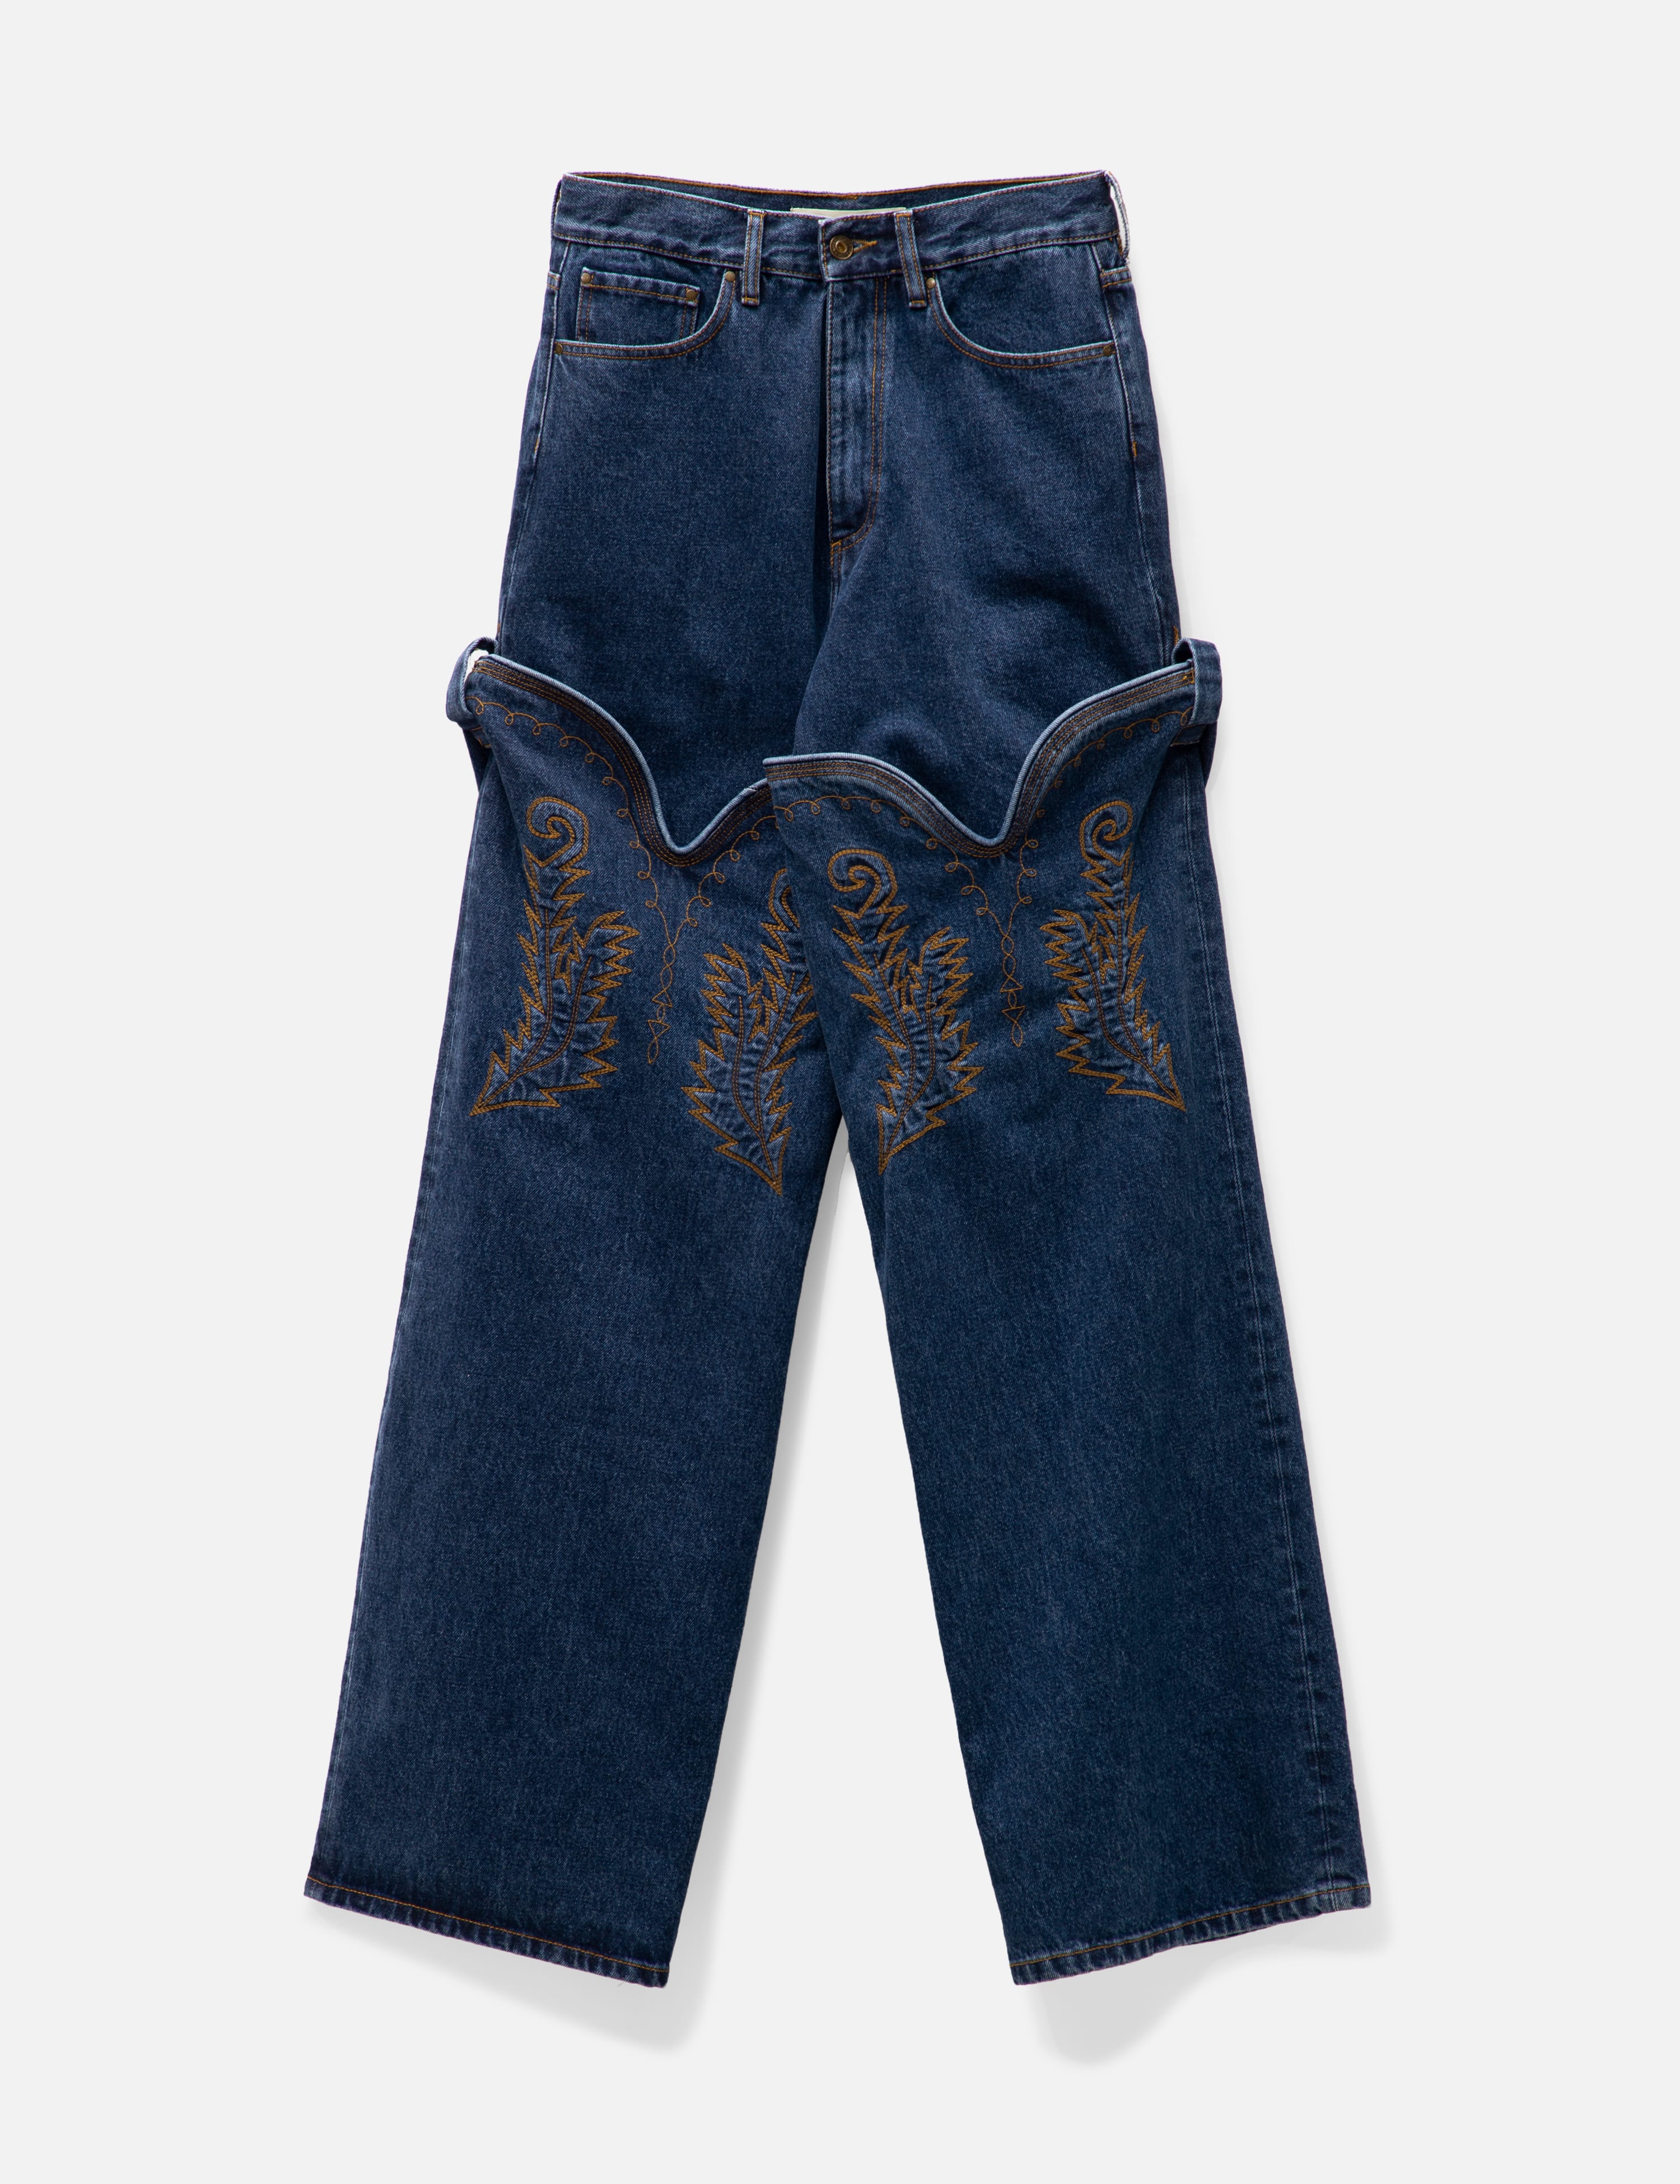 Y/PROJECT - CLASSIC MAXI COWBOY CUFF JEANS | HBX - Globally 